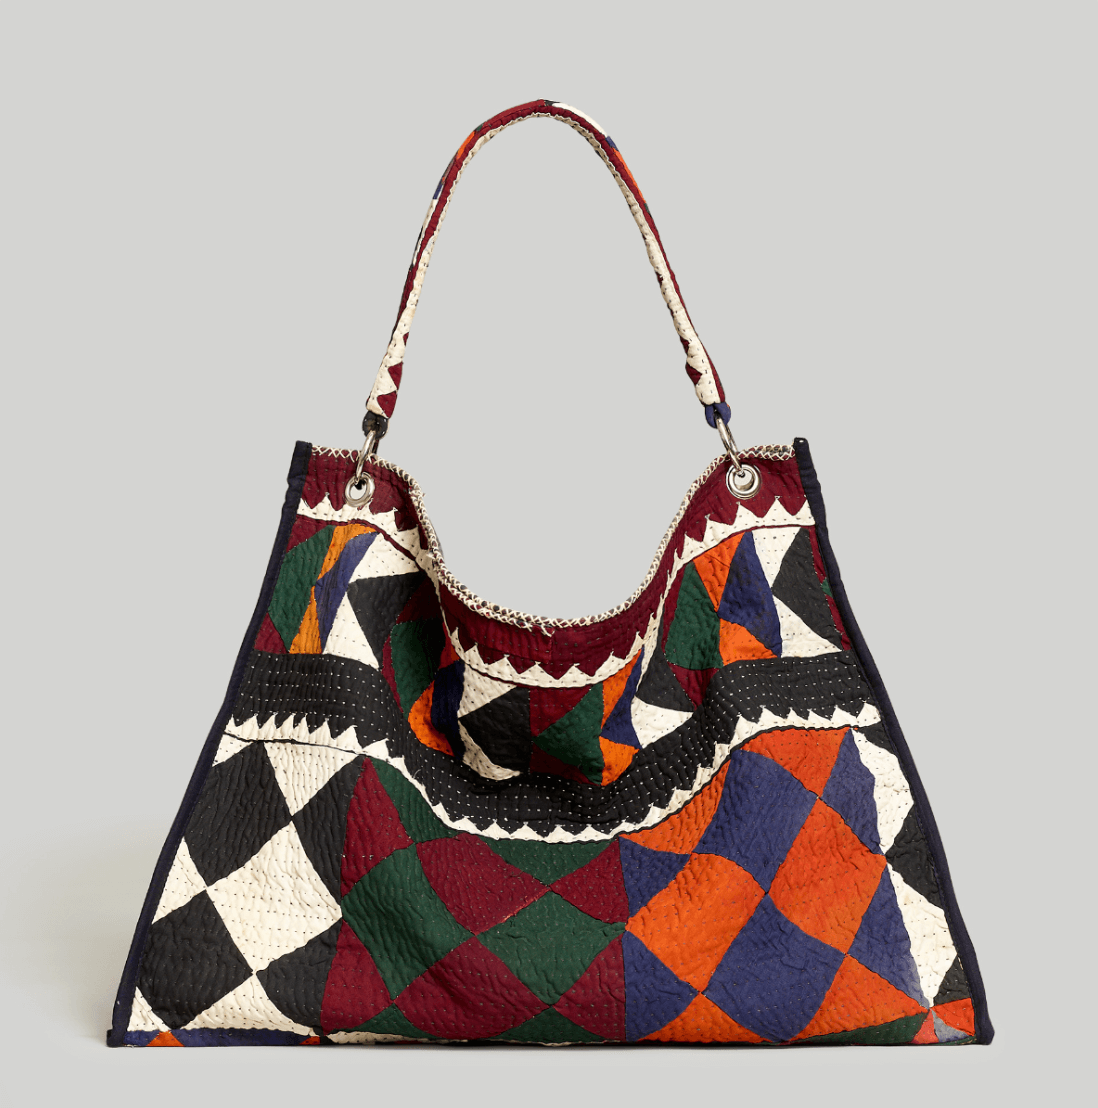 Ralli Quilts | The tradition behind The Sakshi Ralli Quilted Shoulder Bag